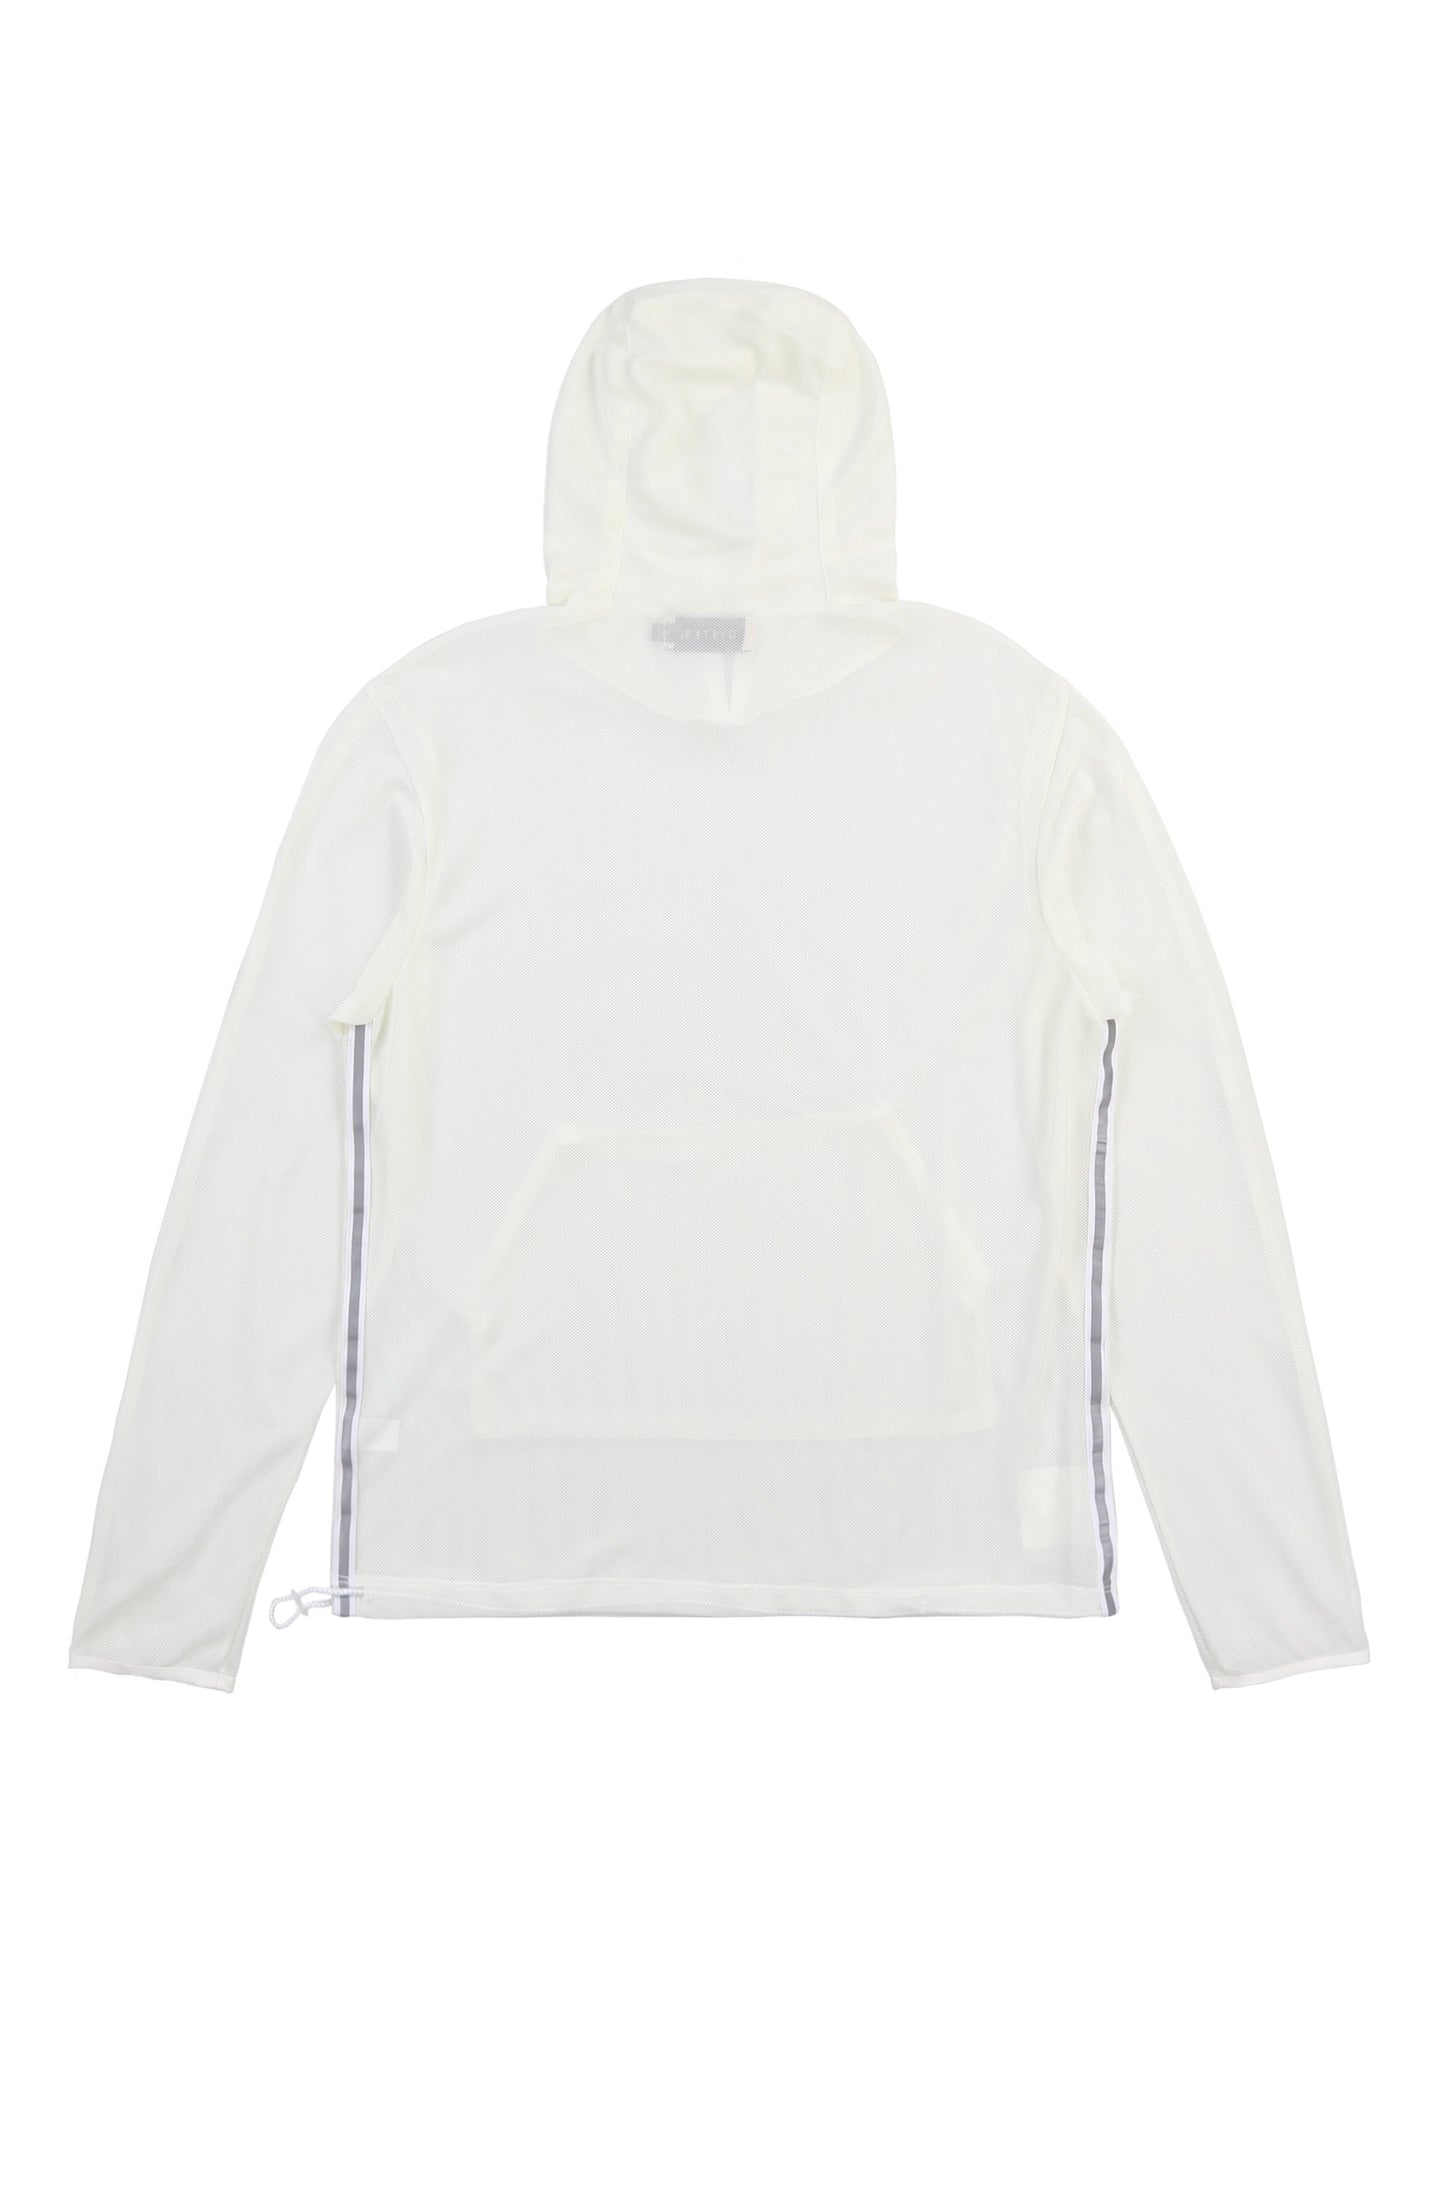 Oyster Mesh Hoodie (White)